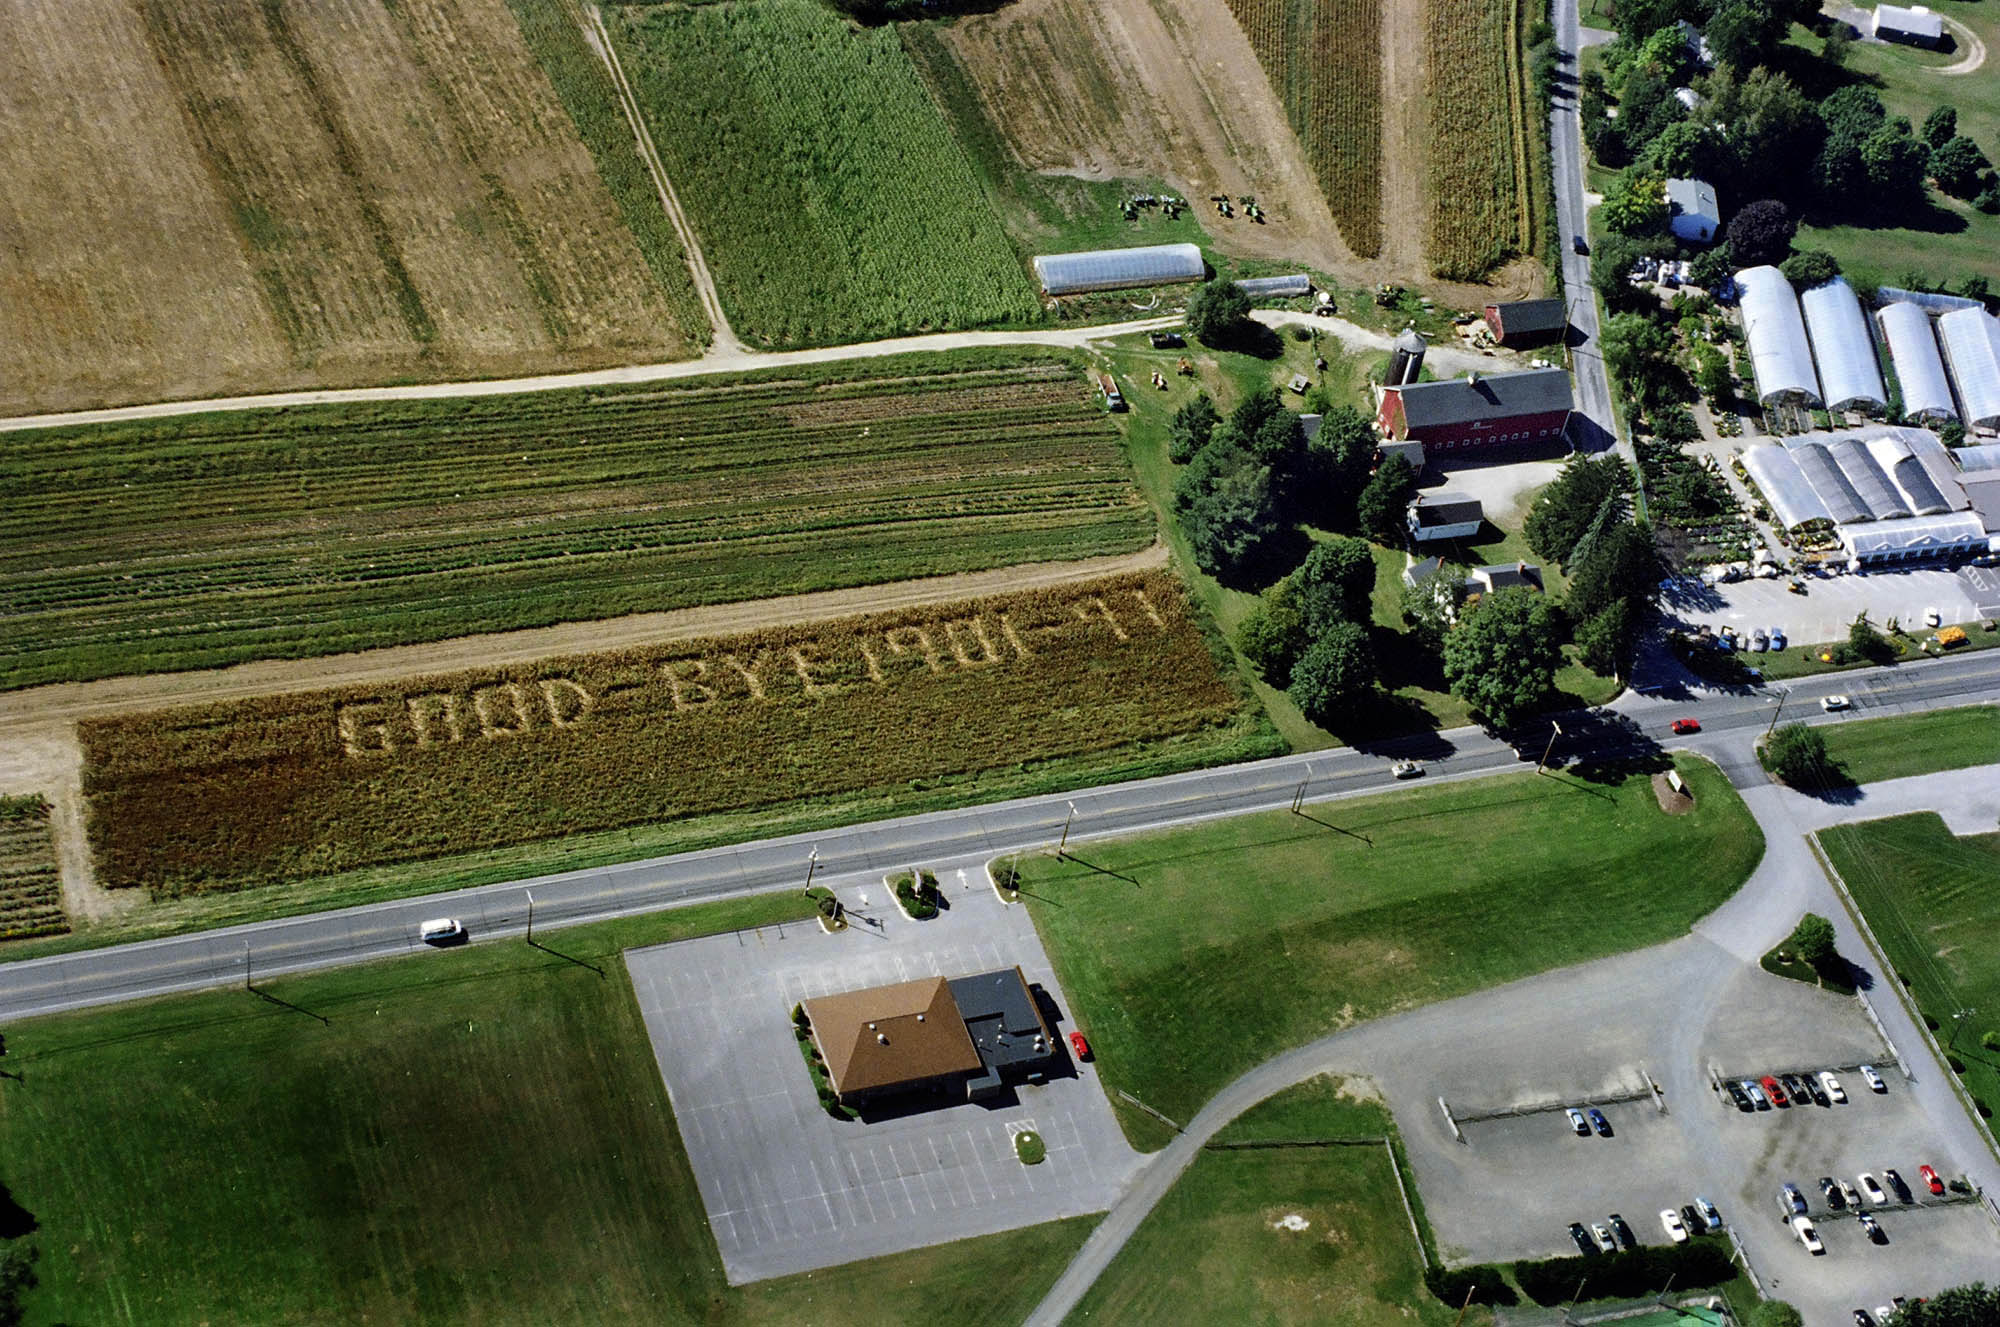 A farewell message from Larson Farm in New Milford is cut into the corn field after the final harvest.